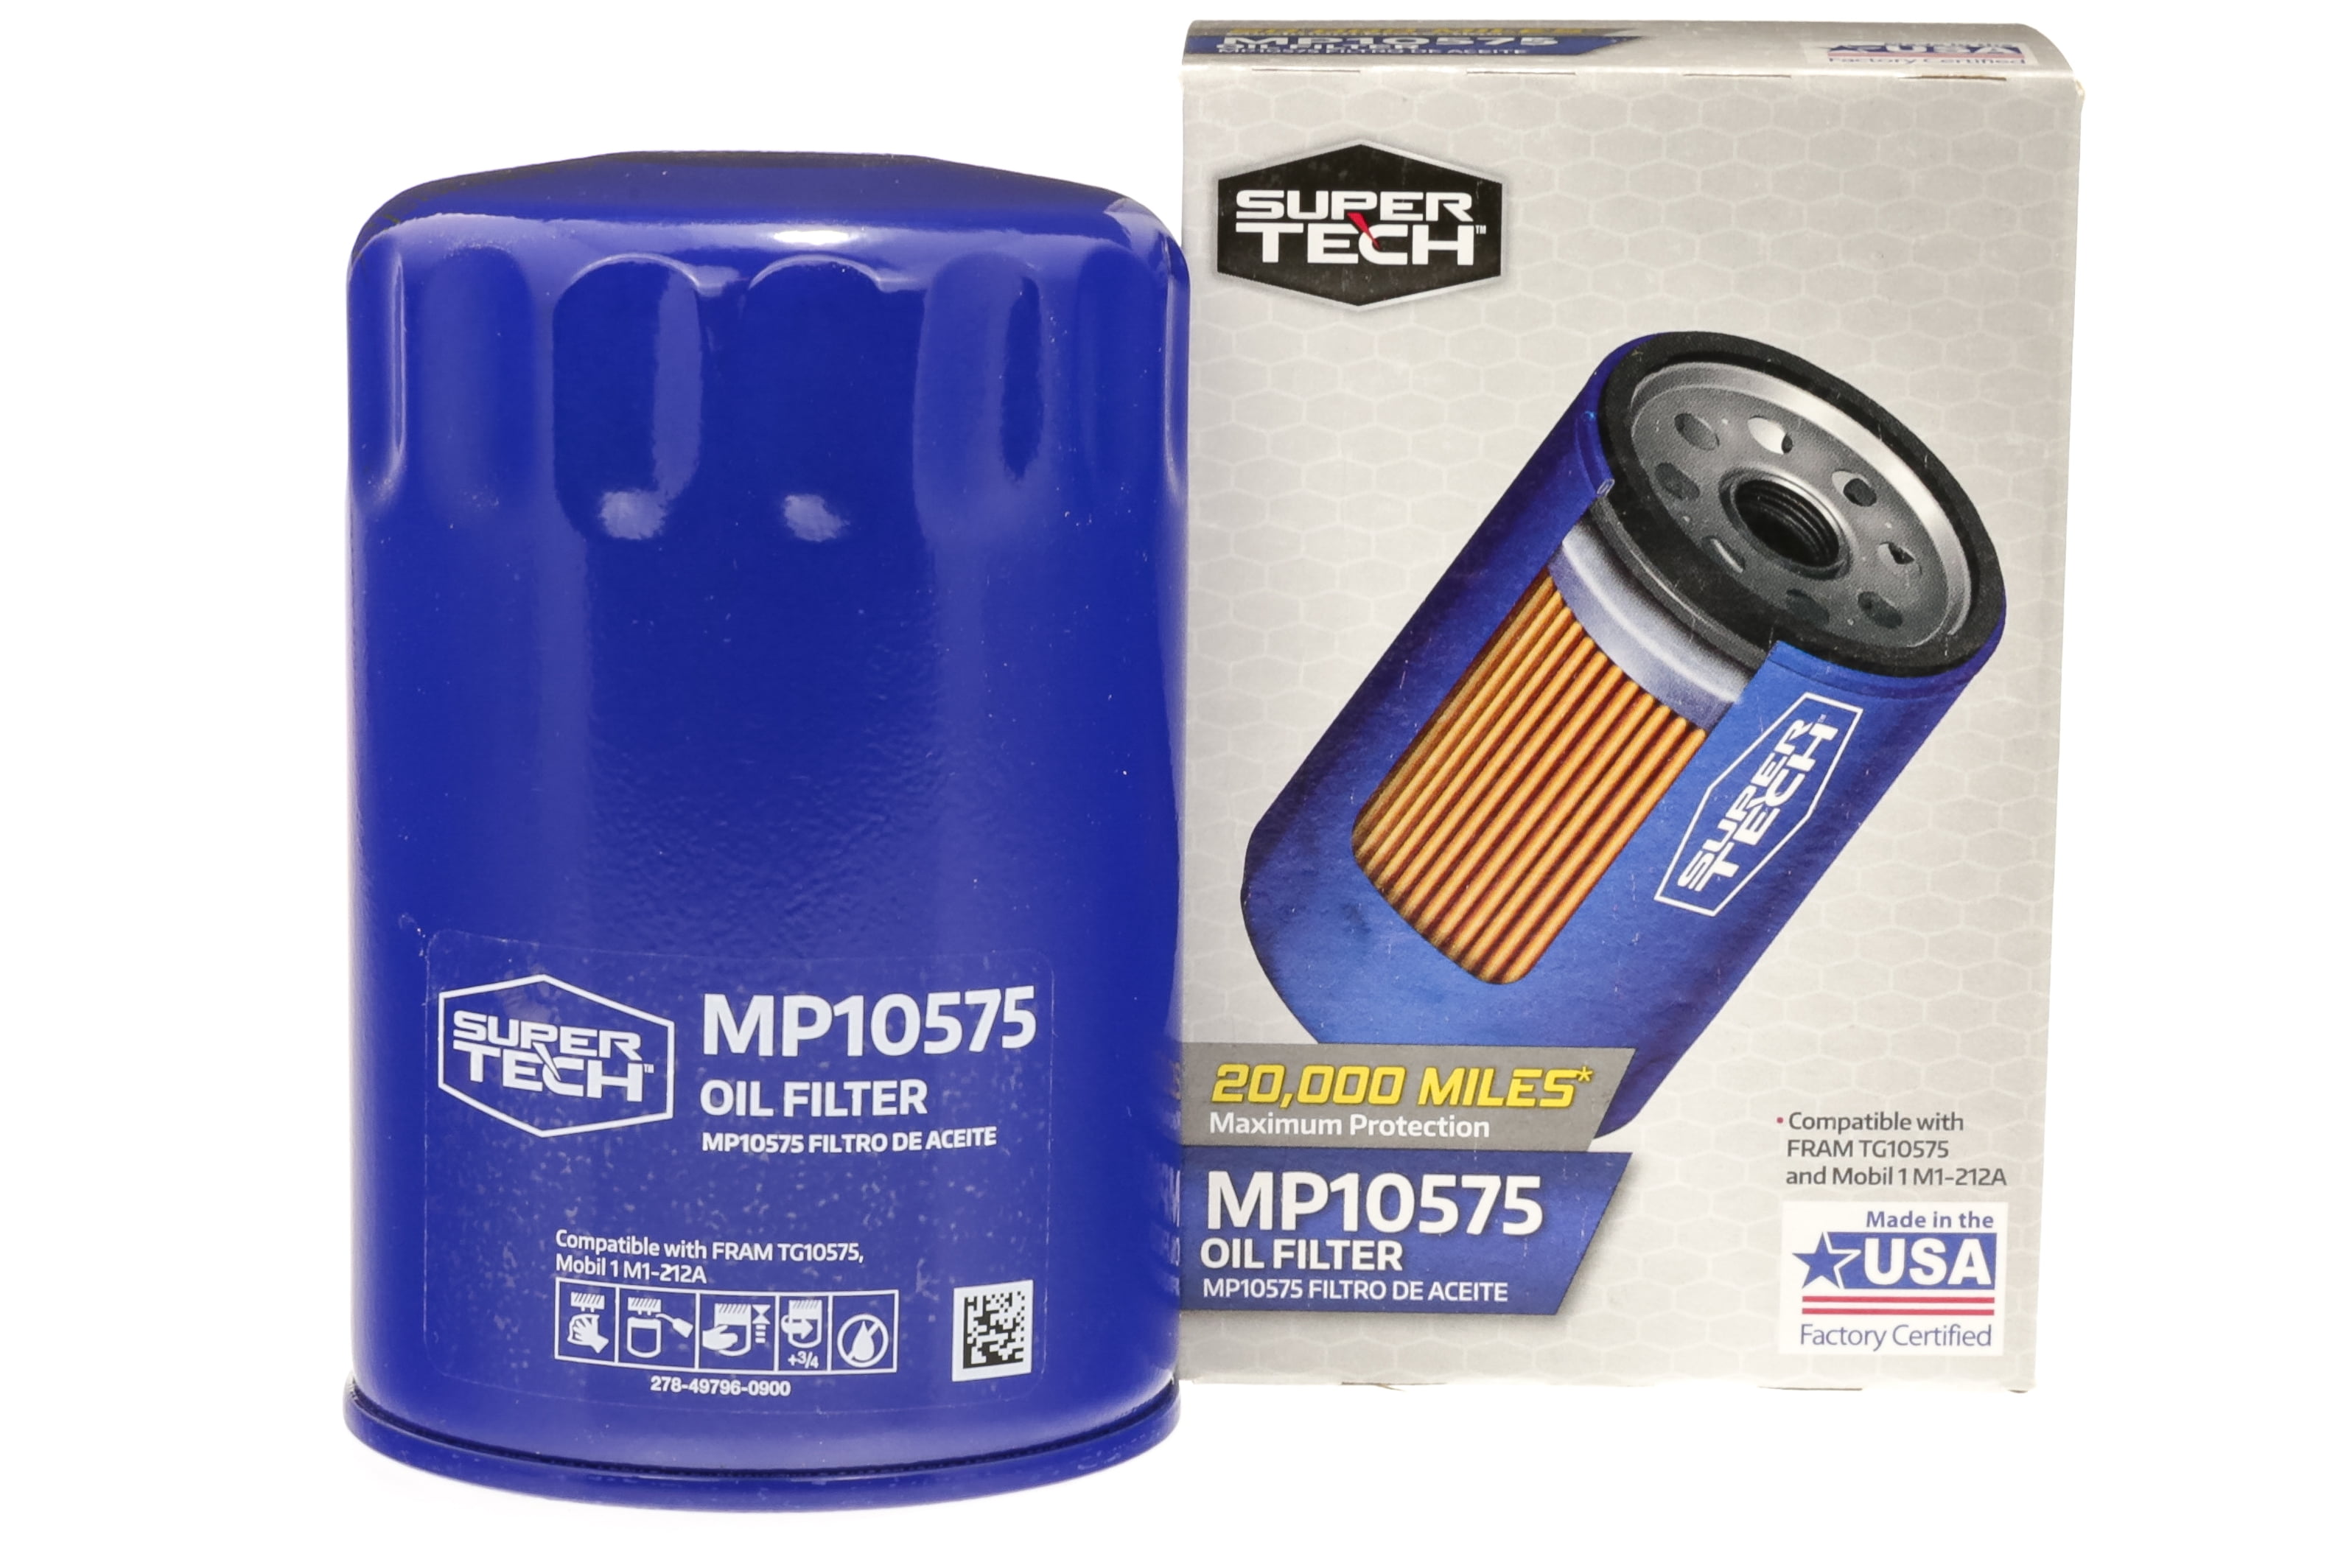 SuperTech Maximum Performance 20,000 mile Synthetic Oil Filter, MP10575, for Buick, Chevrolet, GMC, Dodge, Jeep, Ford